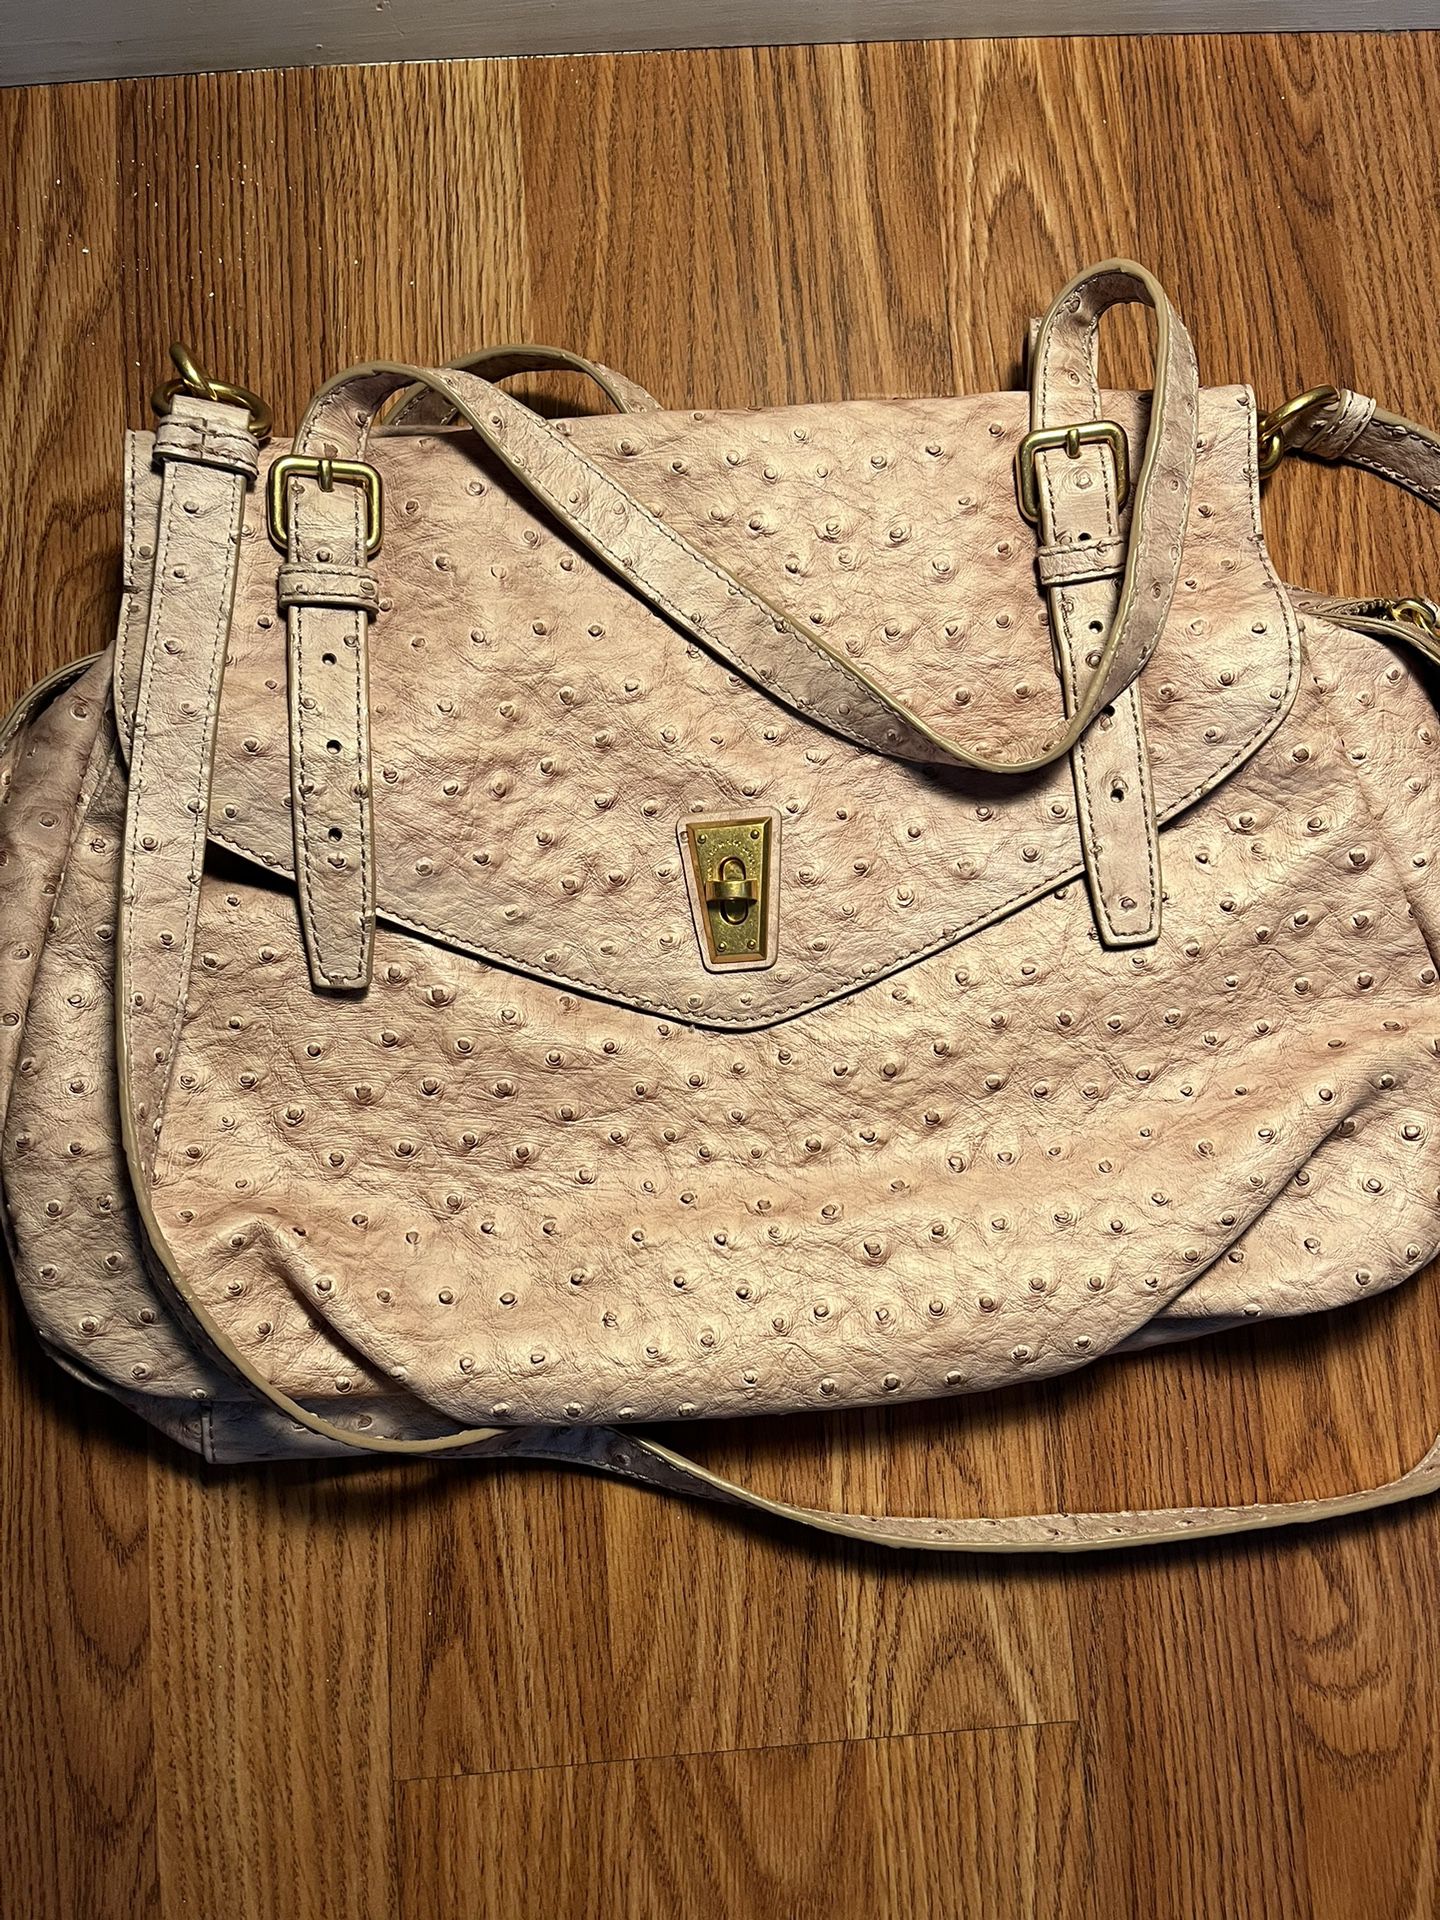 REDUCED !!!!   Marc By Marc Jacobs Pink Ostrich Bag  Never Used  